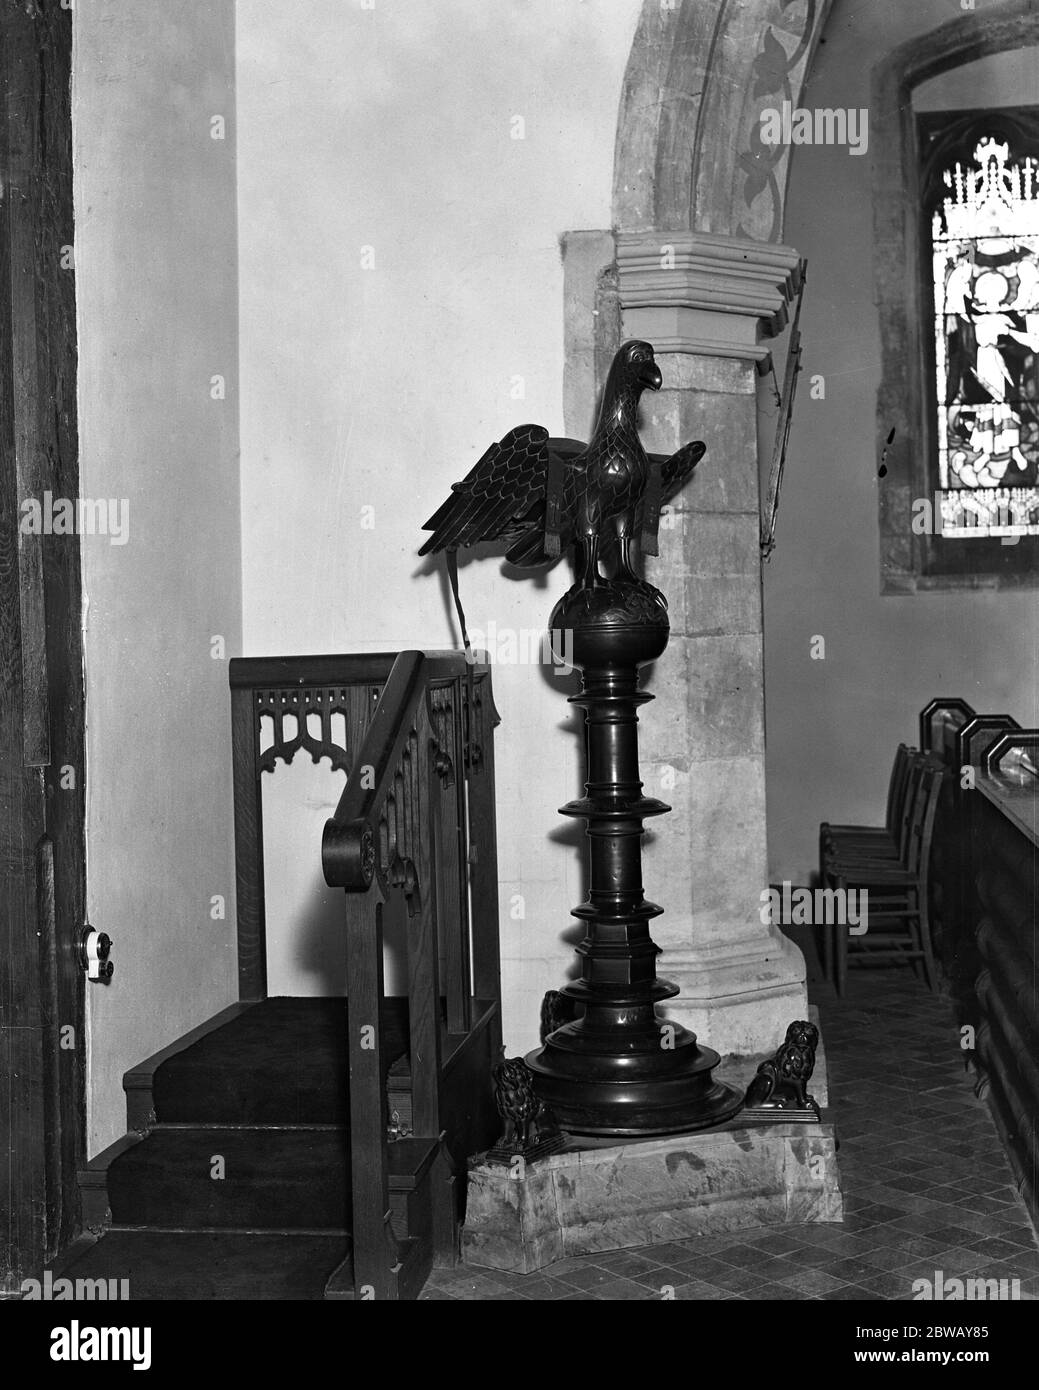 At St Stephen ' s Church , St Albans , this lectern , a fine specimen of 15th century Flemish metal work , has been standing for over 400 years . It is claimed by the city of Edinburgh , basing its claim on the supposition that it was taken from the Abbey at Holyrood by Sir Richard Lee , an officer of the Earl of Hertford , who was entrusted by Henry VIII to destroy Edinburgh in 1544 . St Stephen ' s suggest that the lectern was the gift of the Bishop of Dunkeld , Abbot of Holyrood , early in the 16th century . Stock Photo